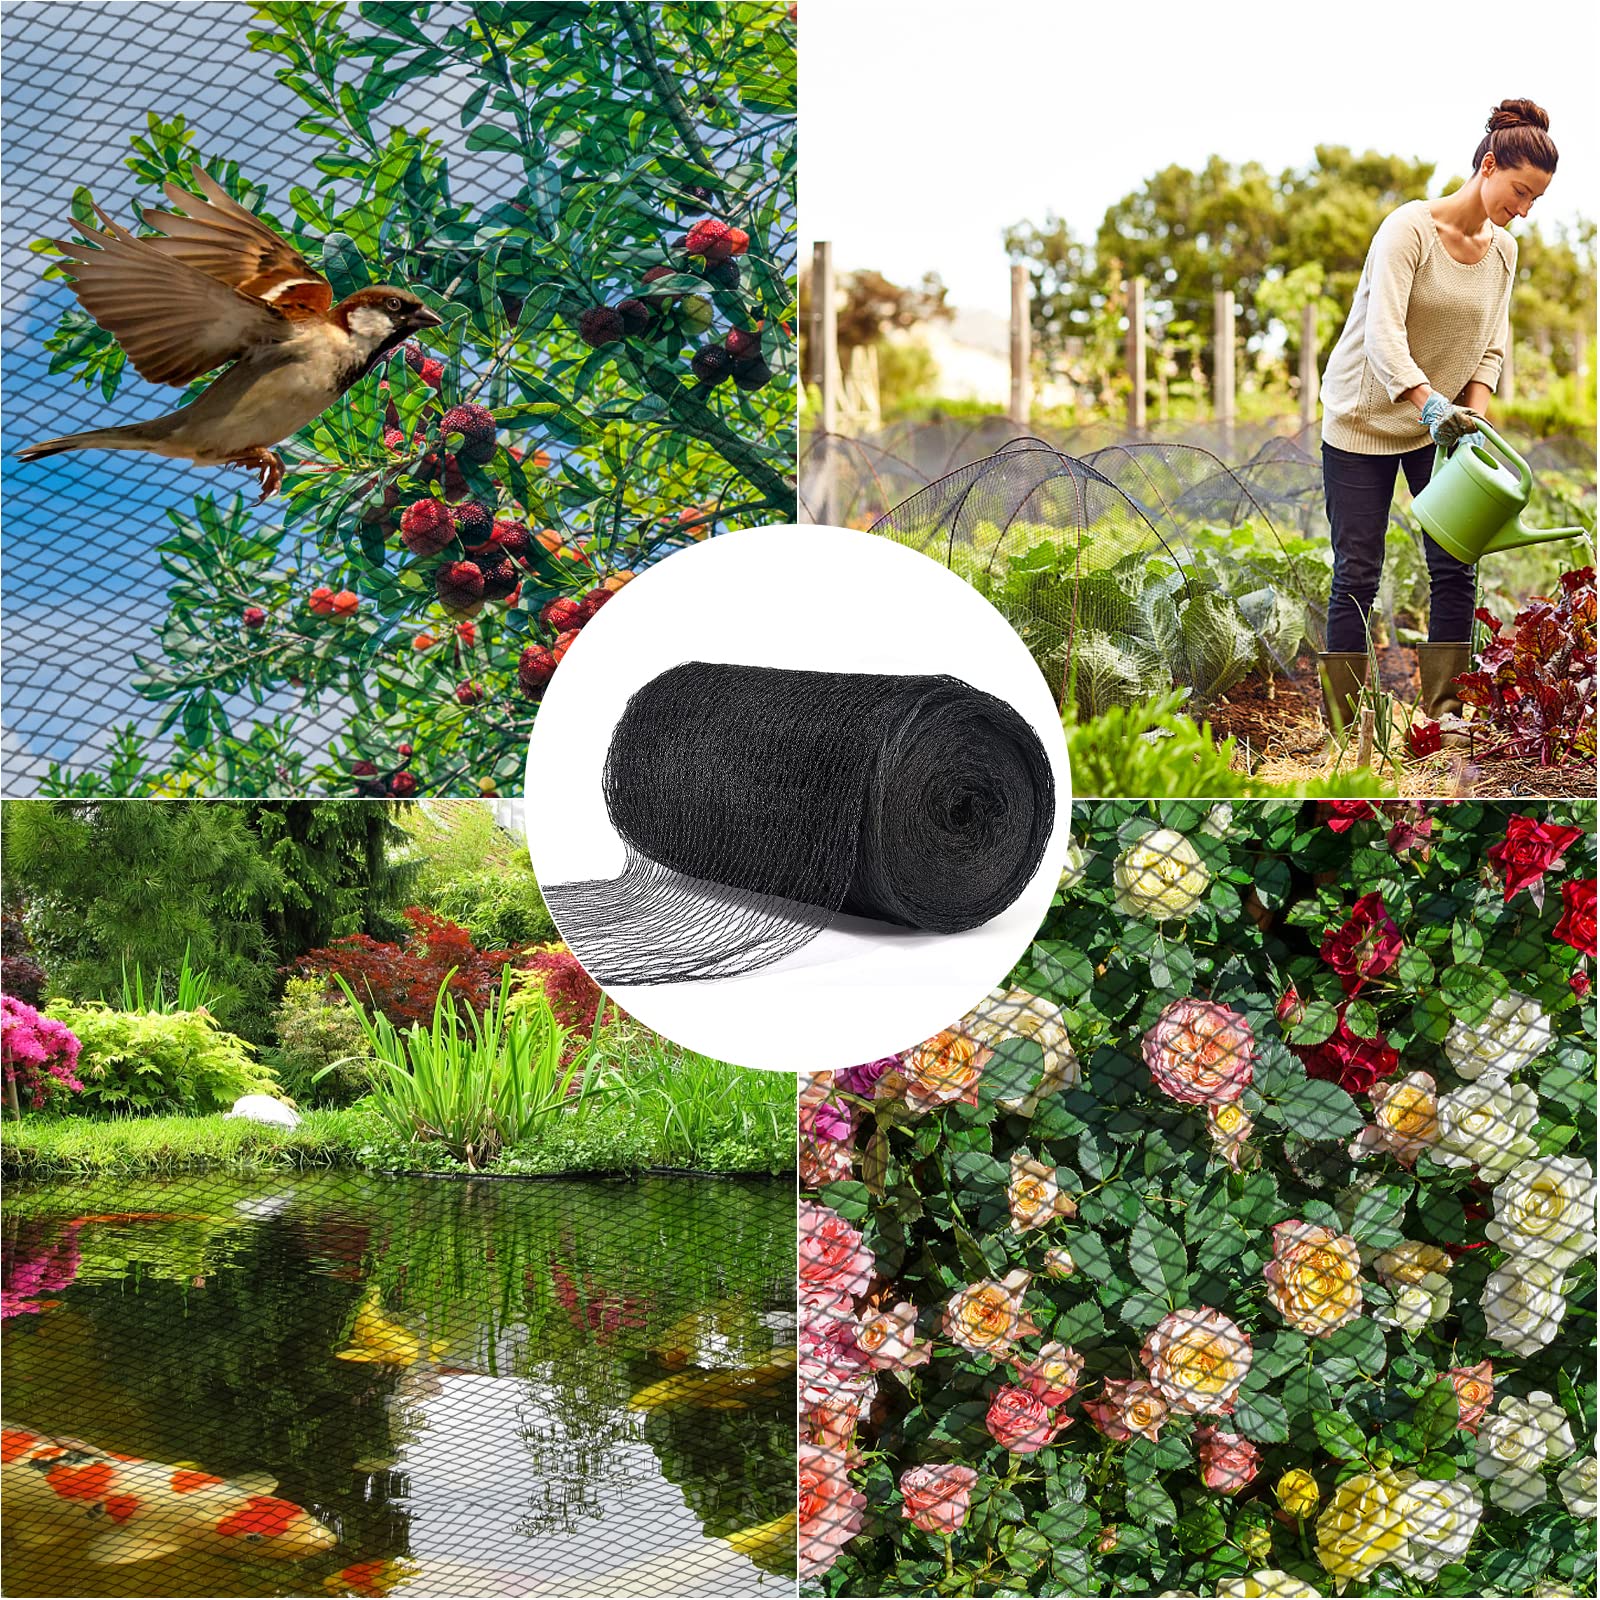 Pond Netting, 15 x 20 FT Pond Net Heavy Duty Pond Netting for Koi Ponds, Garden Pool Fine Mesh Netting Kit for Leaves, Protects Koi Fish from Birds Cats Predators, with 14 Stakes and 30 Cable Zip Ties